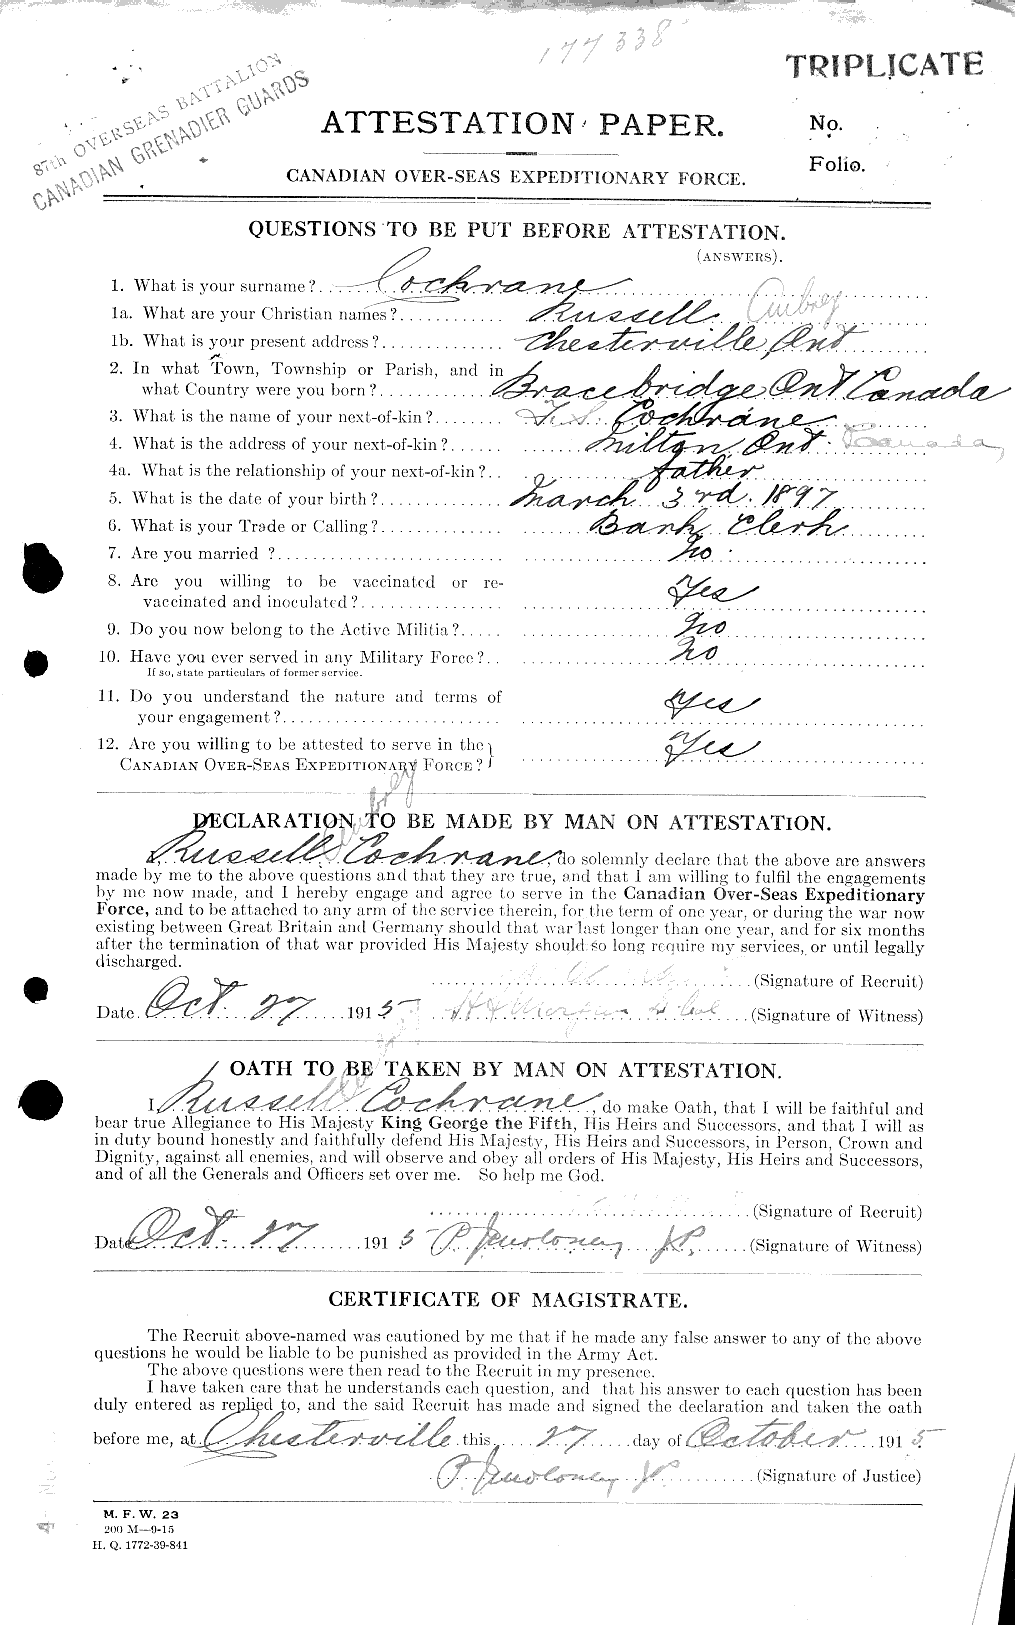 Personnel Records of the First World War - CEF 026462a